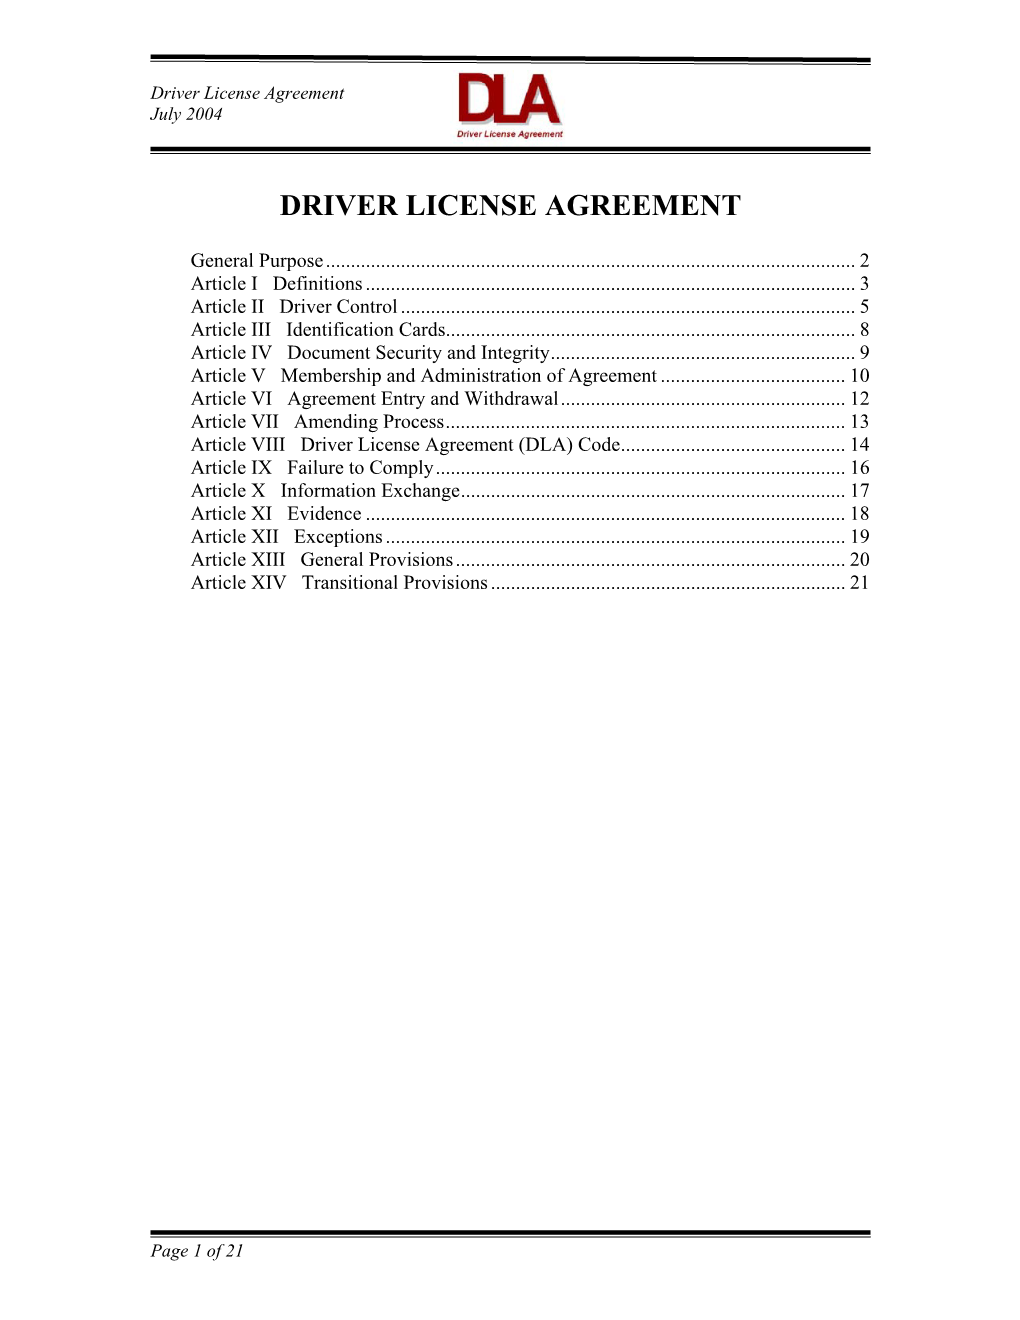 Driver License Agreement July 2004